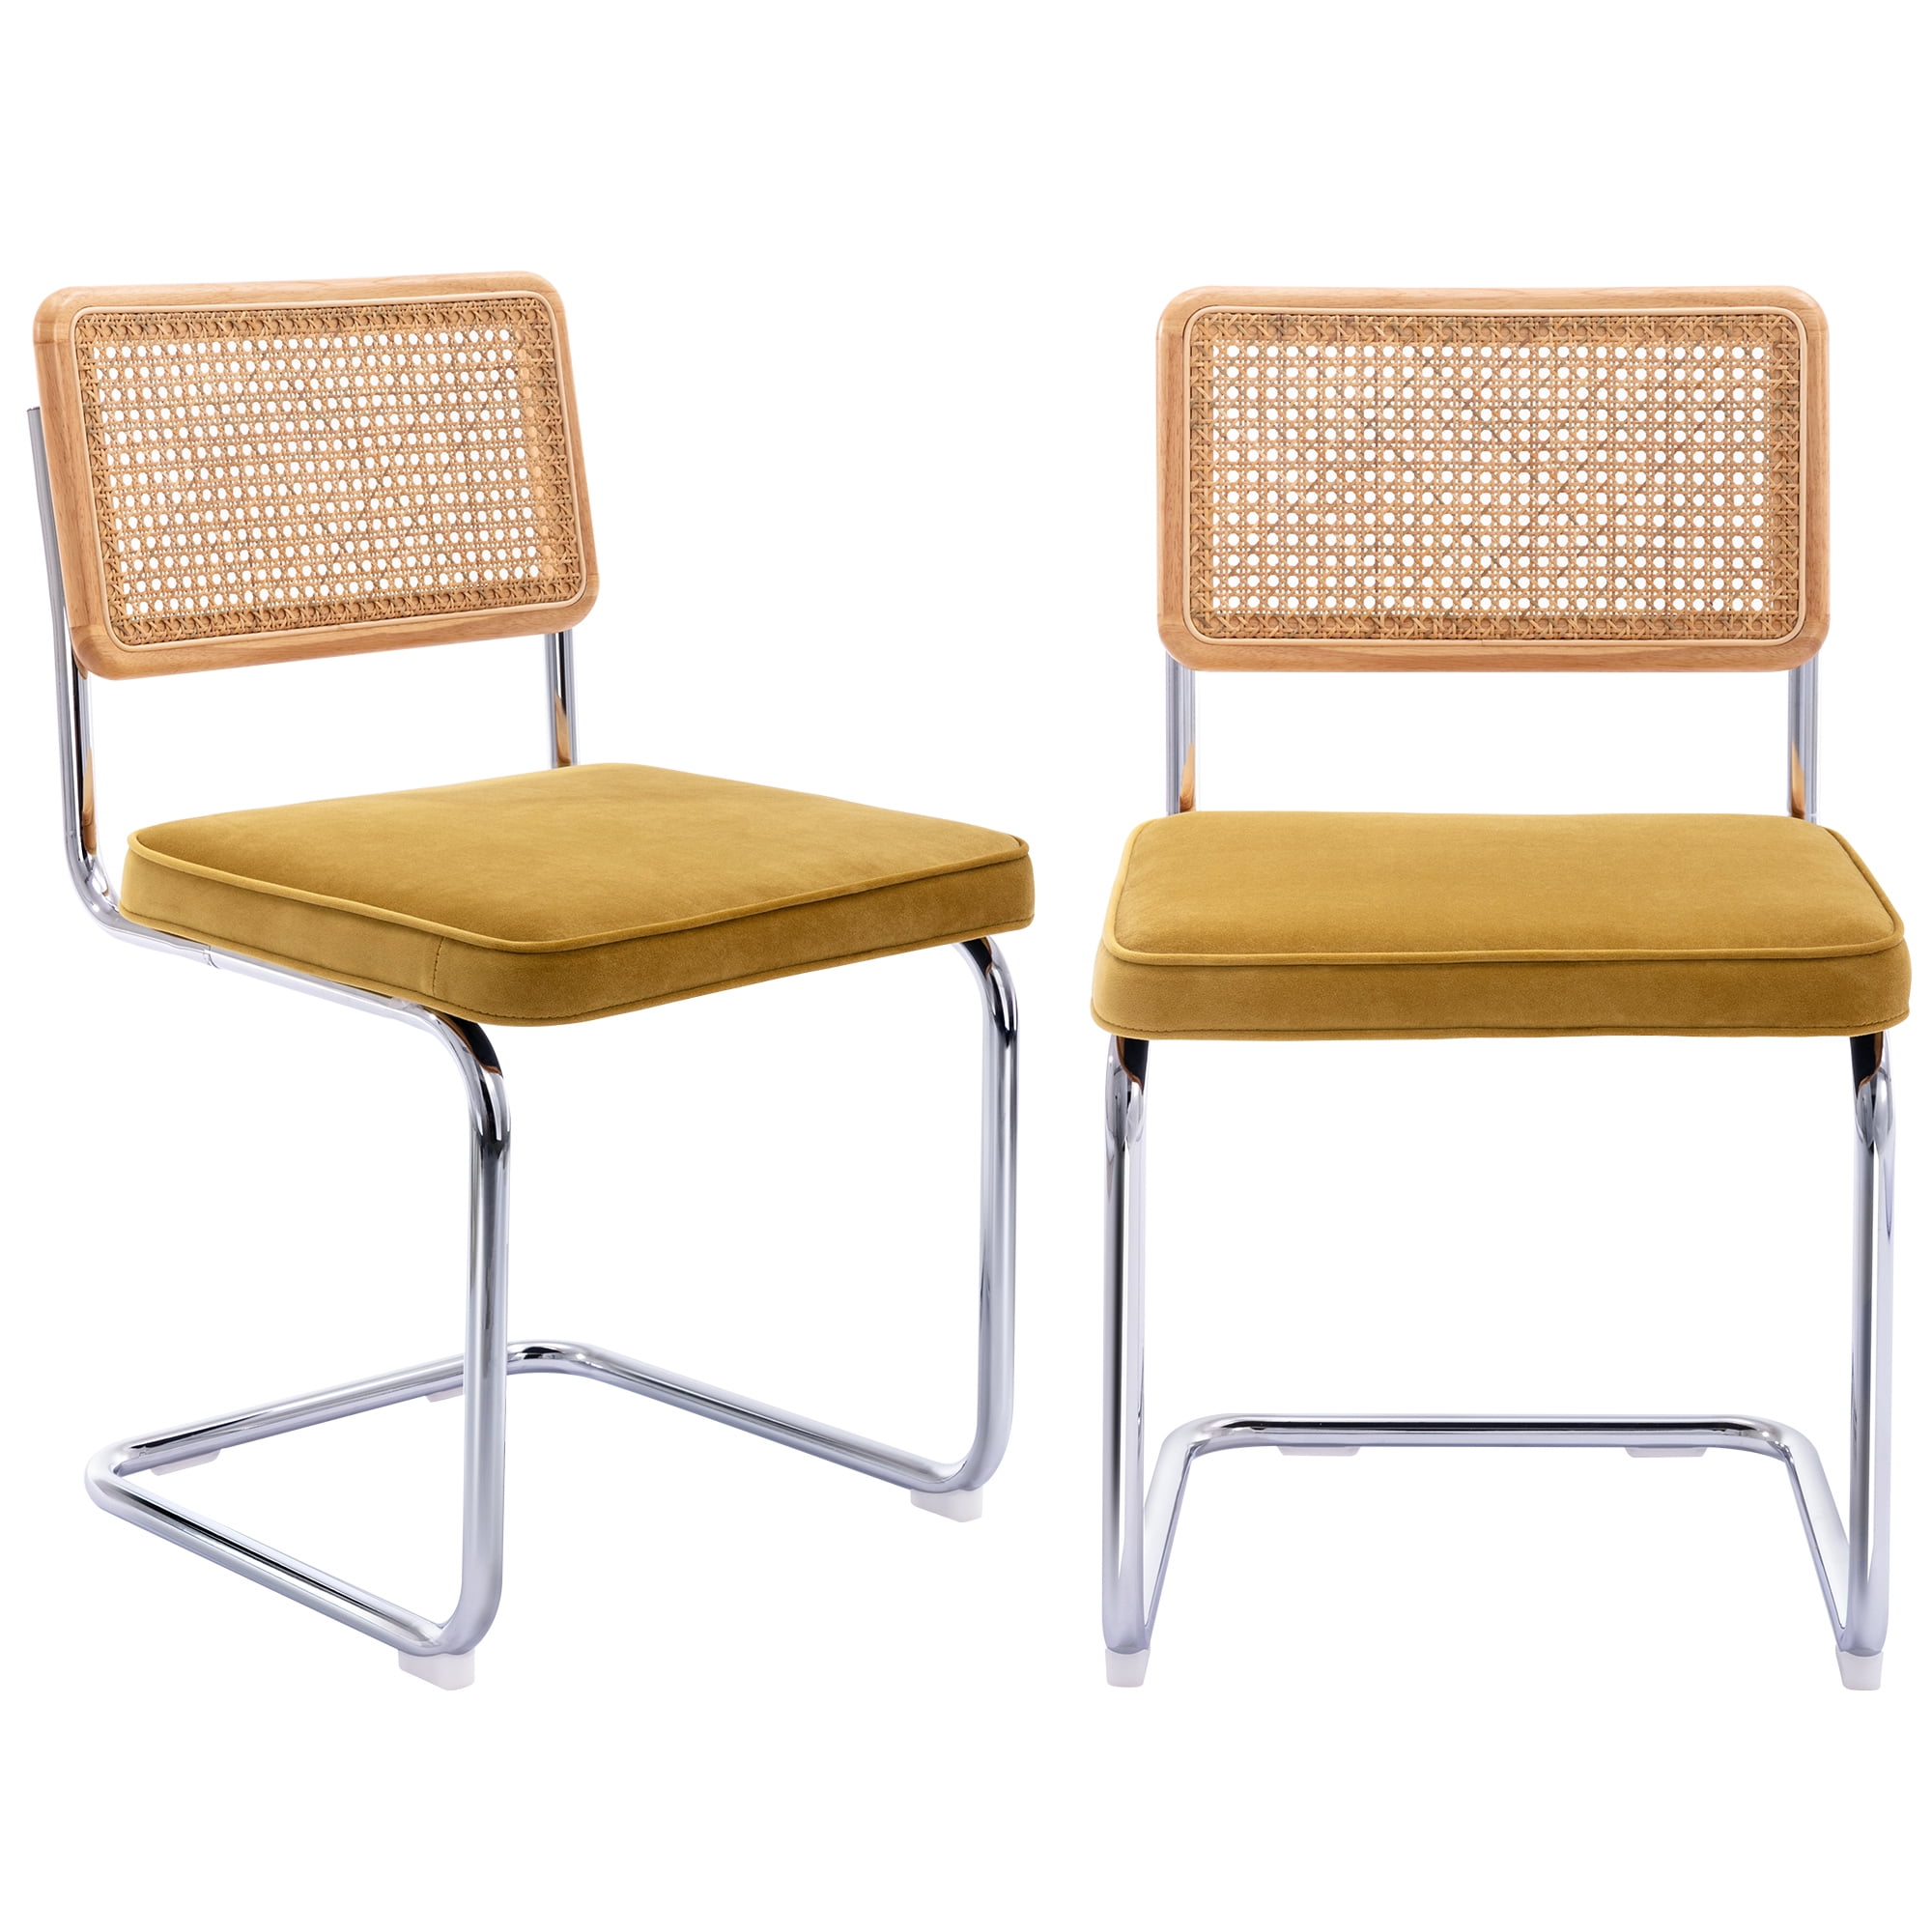 Zesthouse Rattan Dining Chairs Set of 2, Velvet Upholstered Side Chairs ...